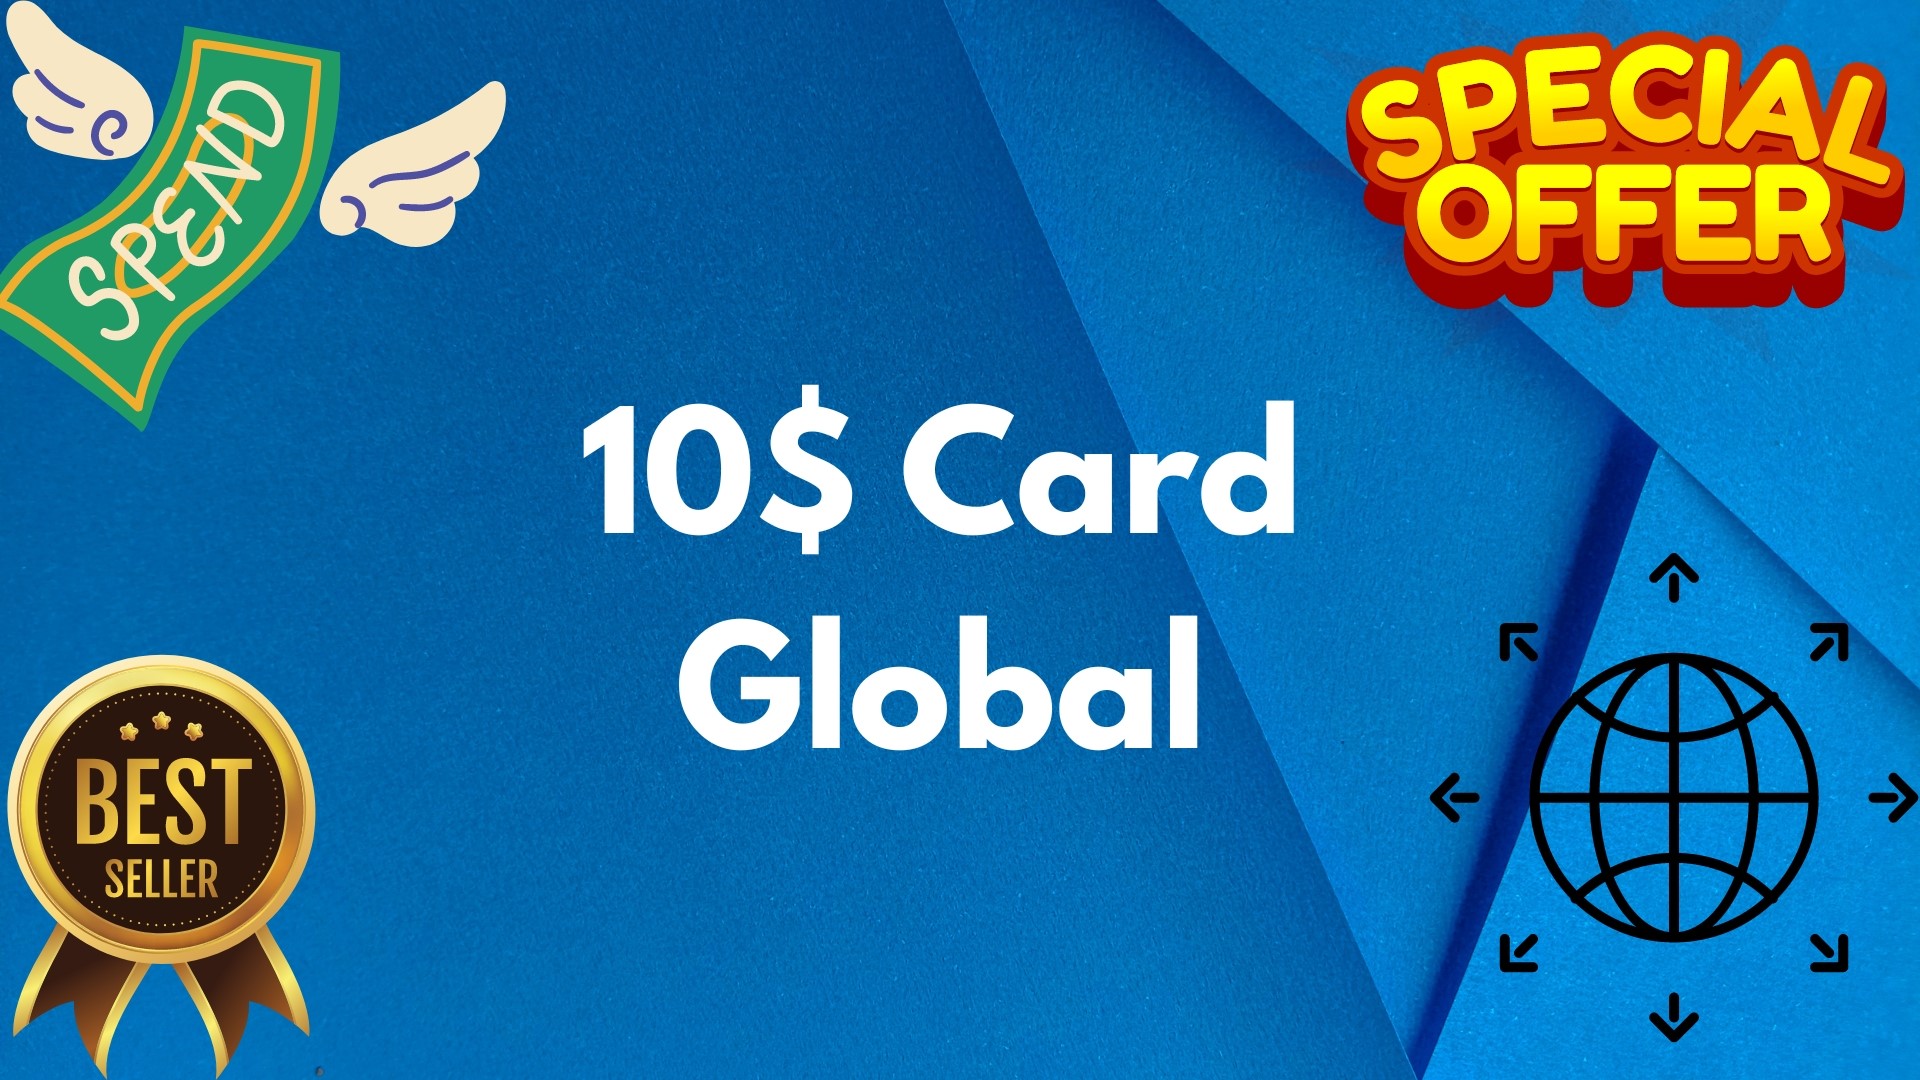 💵10$ CARD GLOBAL🌎All Services/Google/Others.ect⚡✅